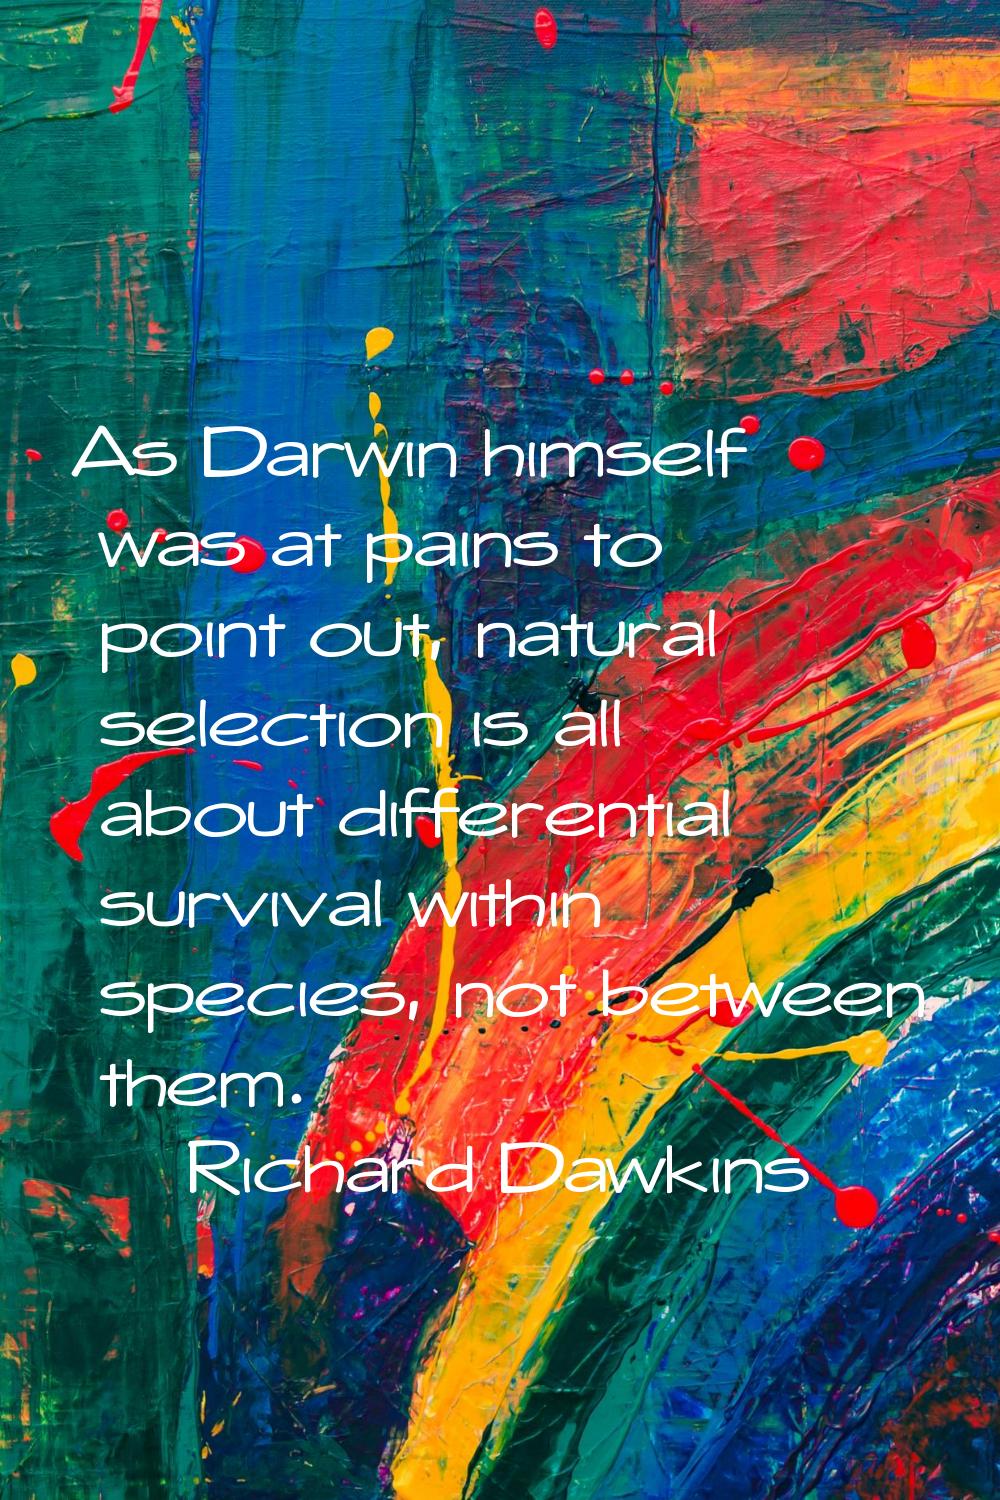 As Darwin himself was at pains to point out, natural selection is all about differential survival w